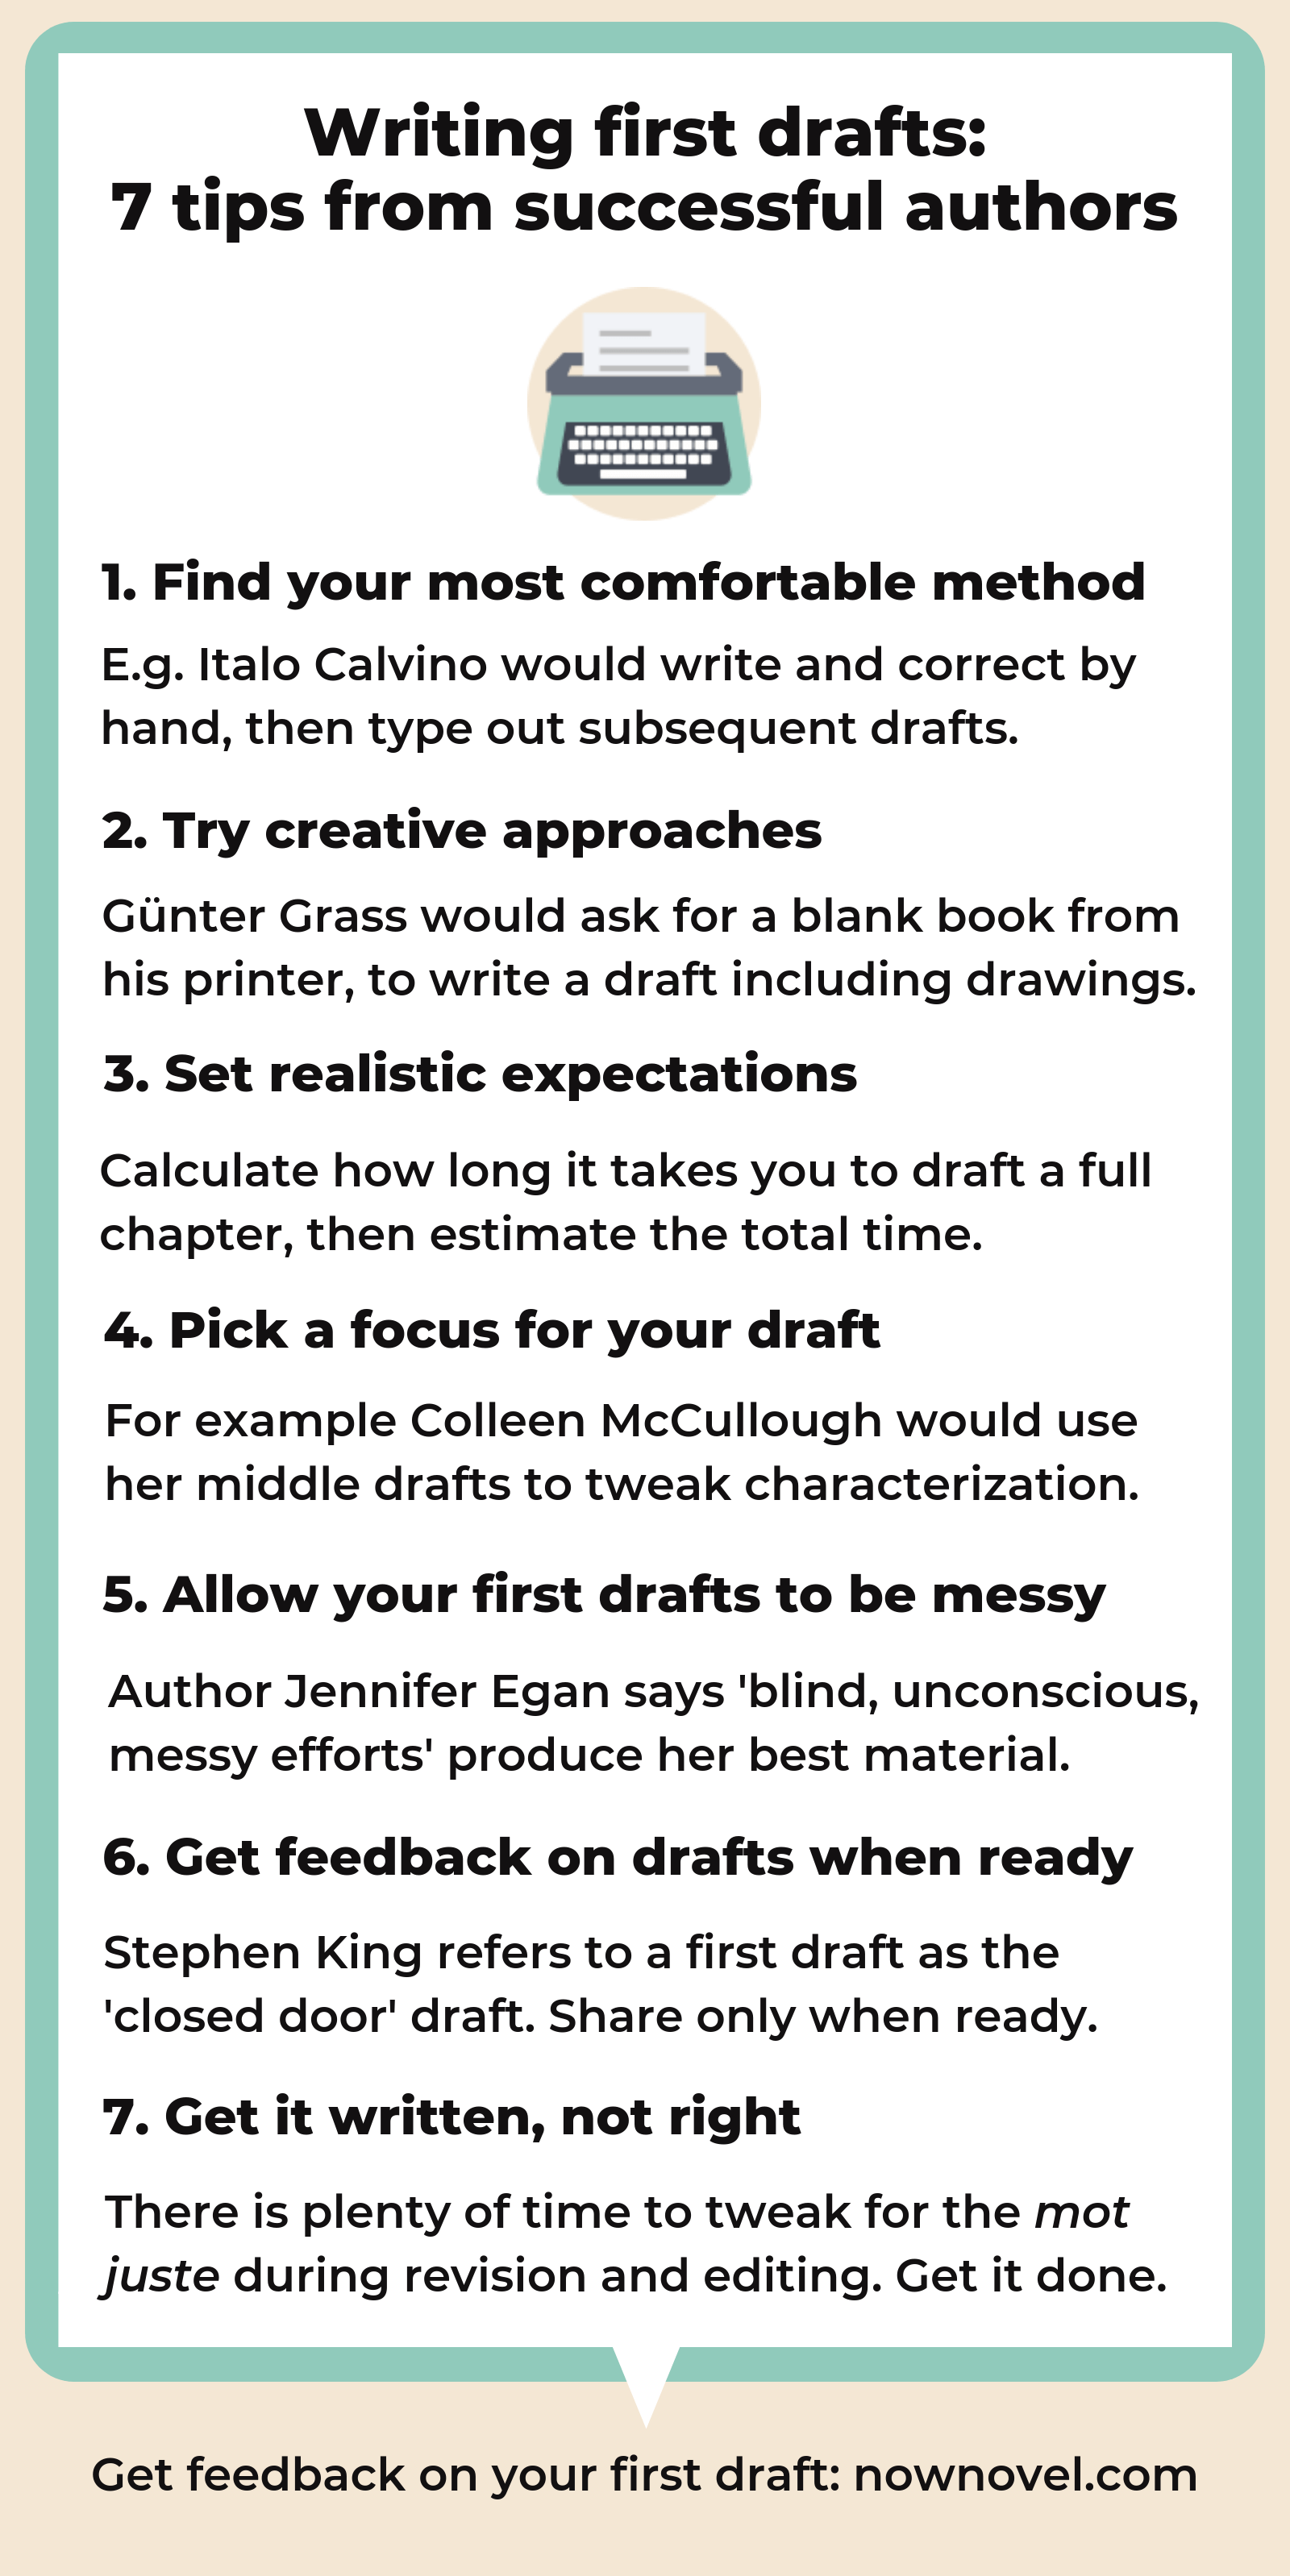 Infographic - writing first drafts | Now Novel